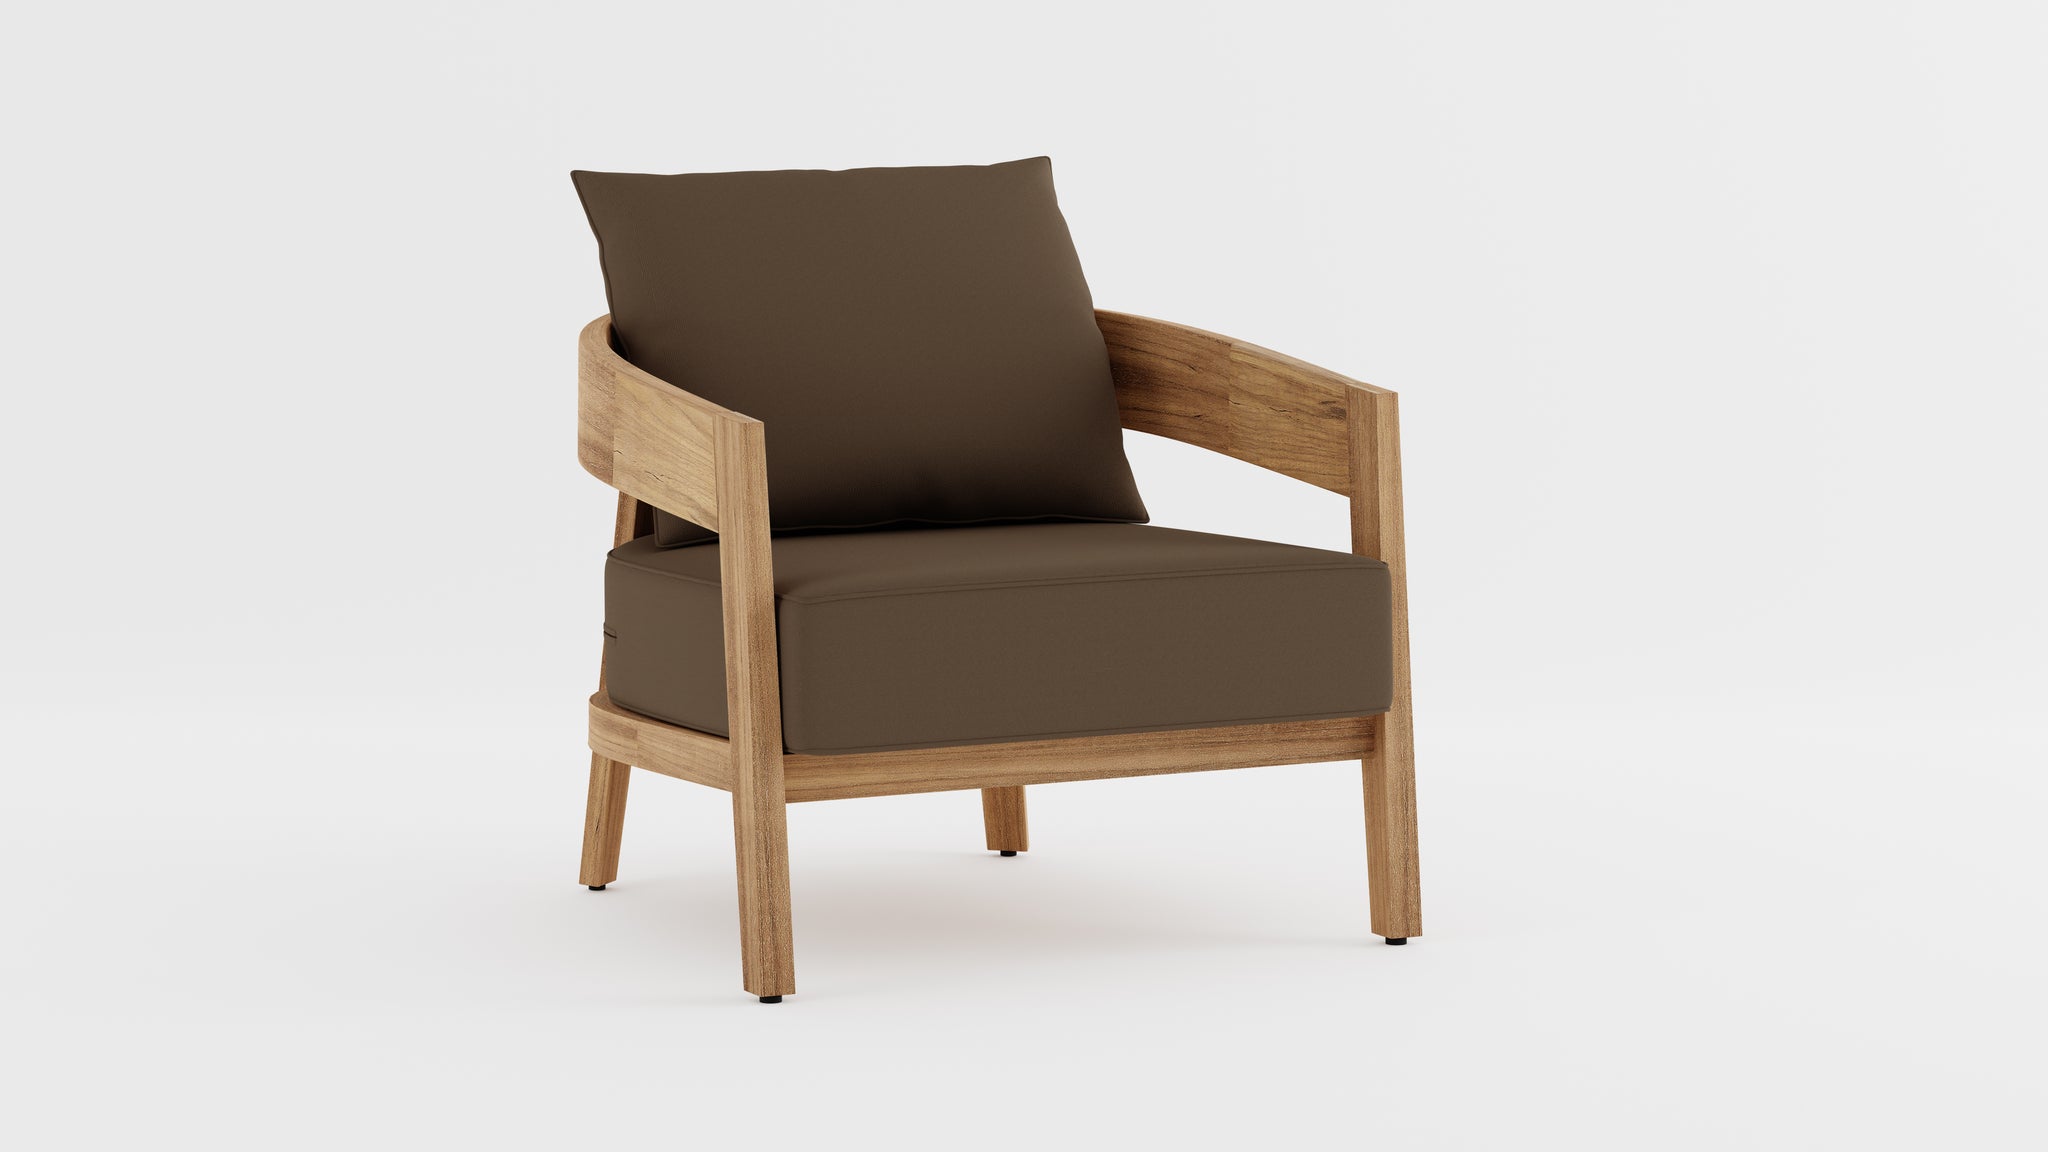 The Windsor Outdoor Teak Lounge Armchair with Taupe Cushions